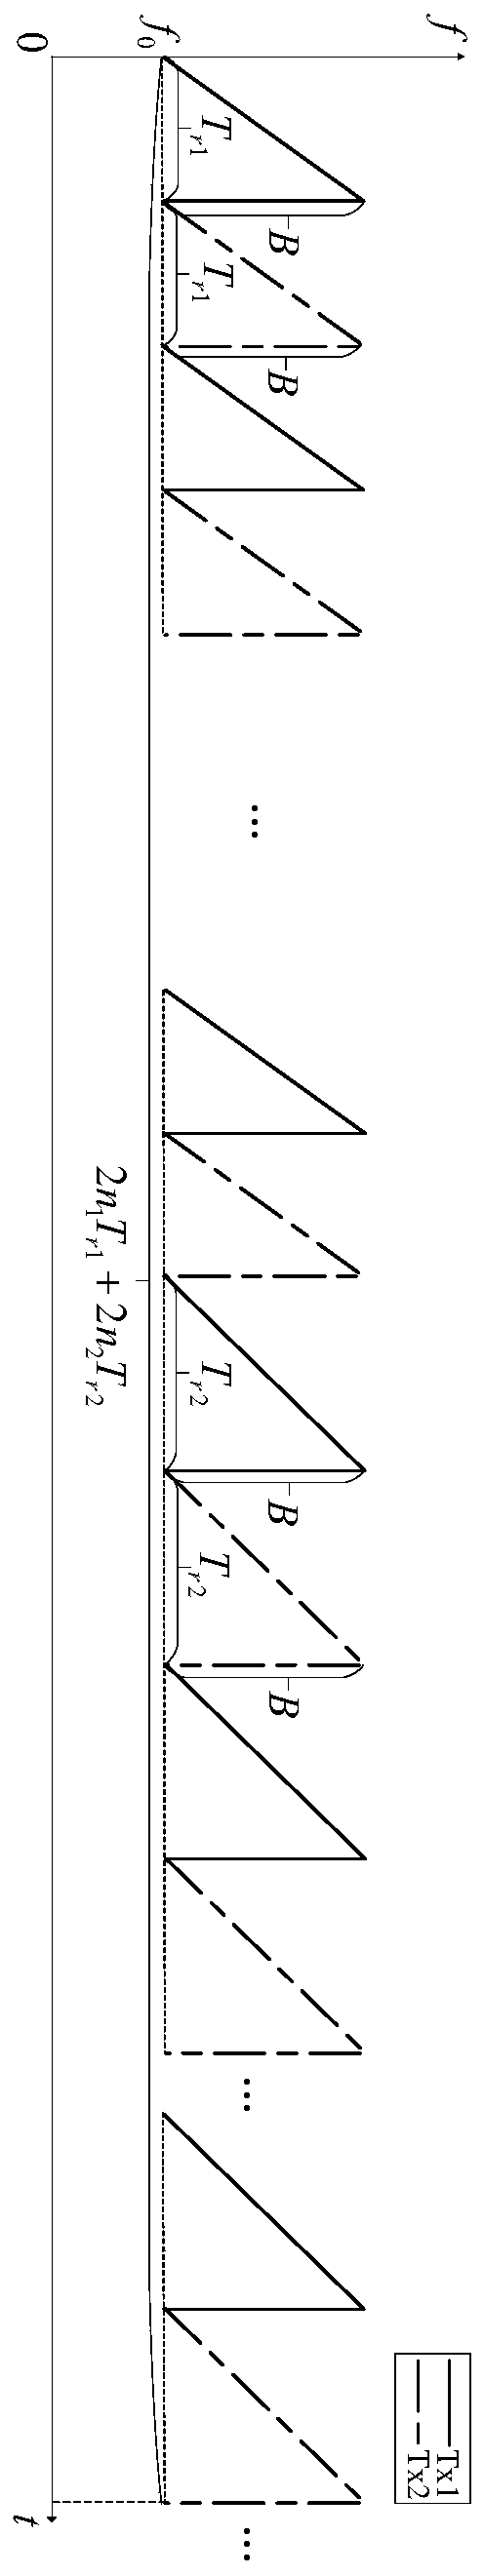 Velocity ambiguity resolution angle measurement method for vehicle-mounted LFMCW radar